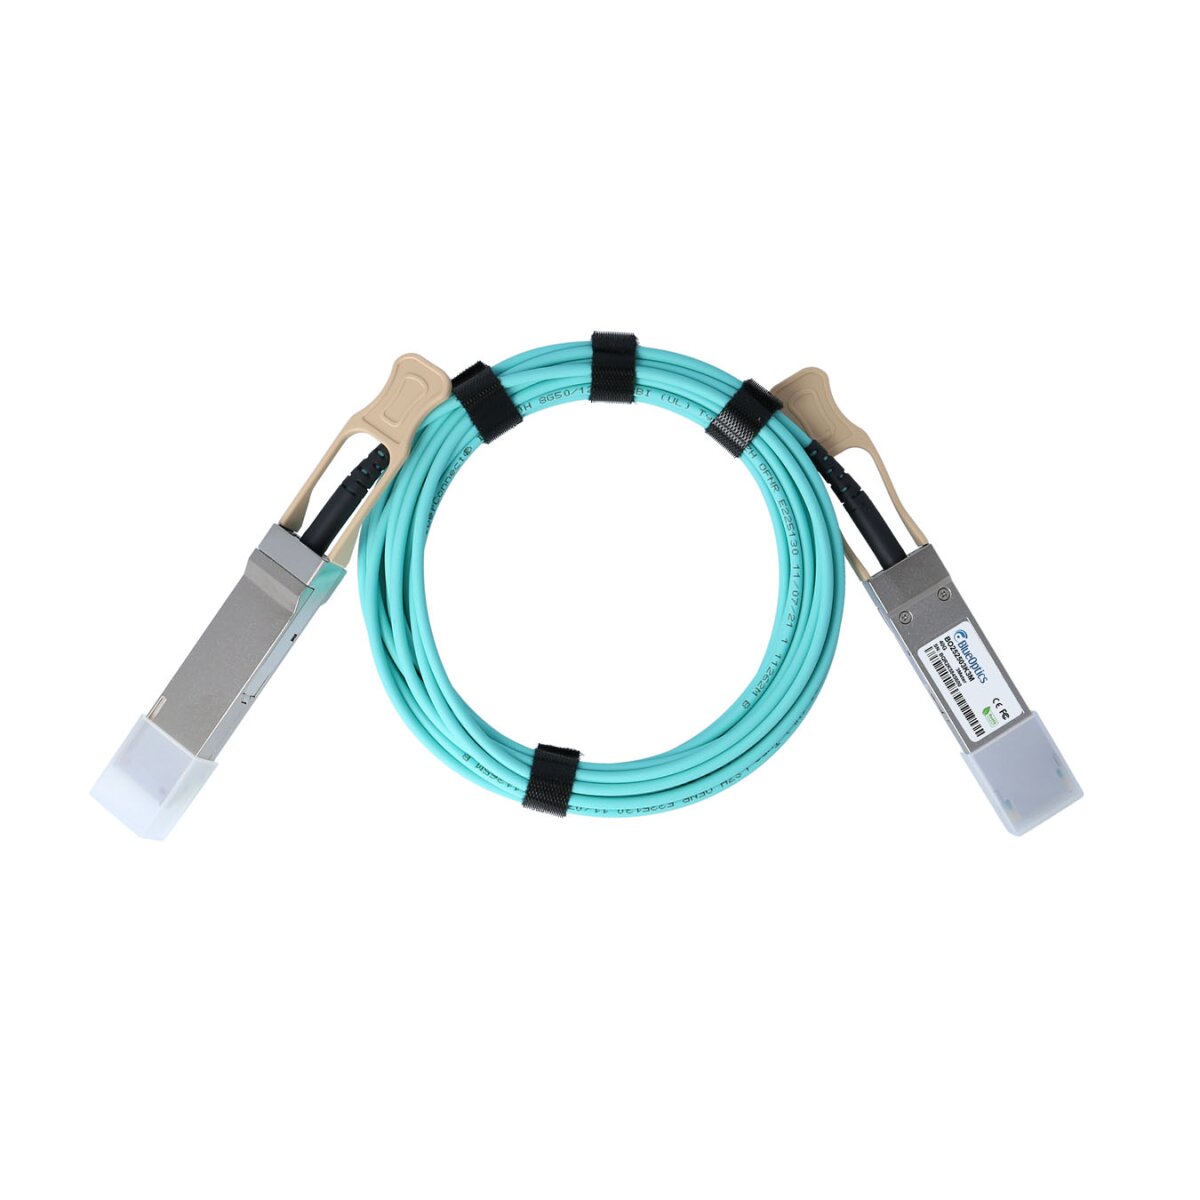 Cheap cables & adapters OCTO online AG IT the in shop